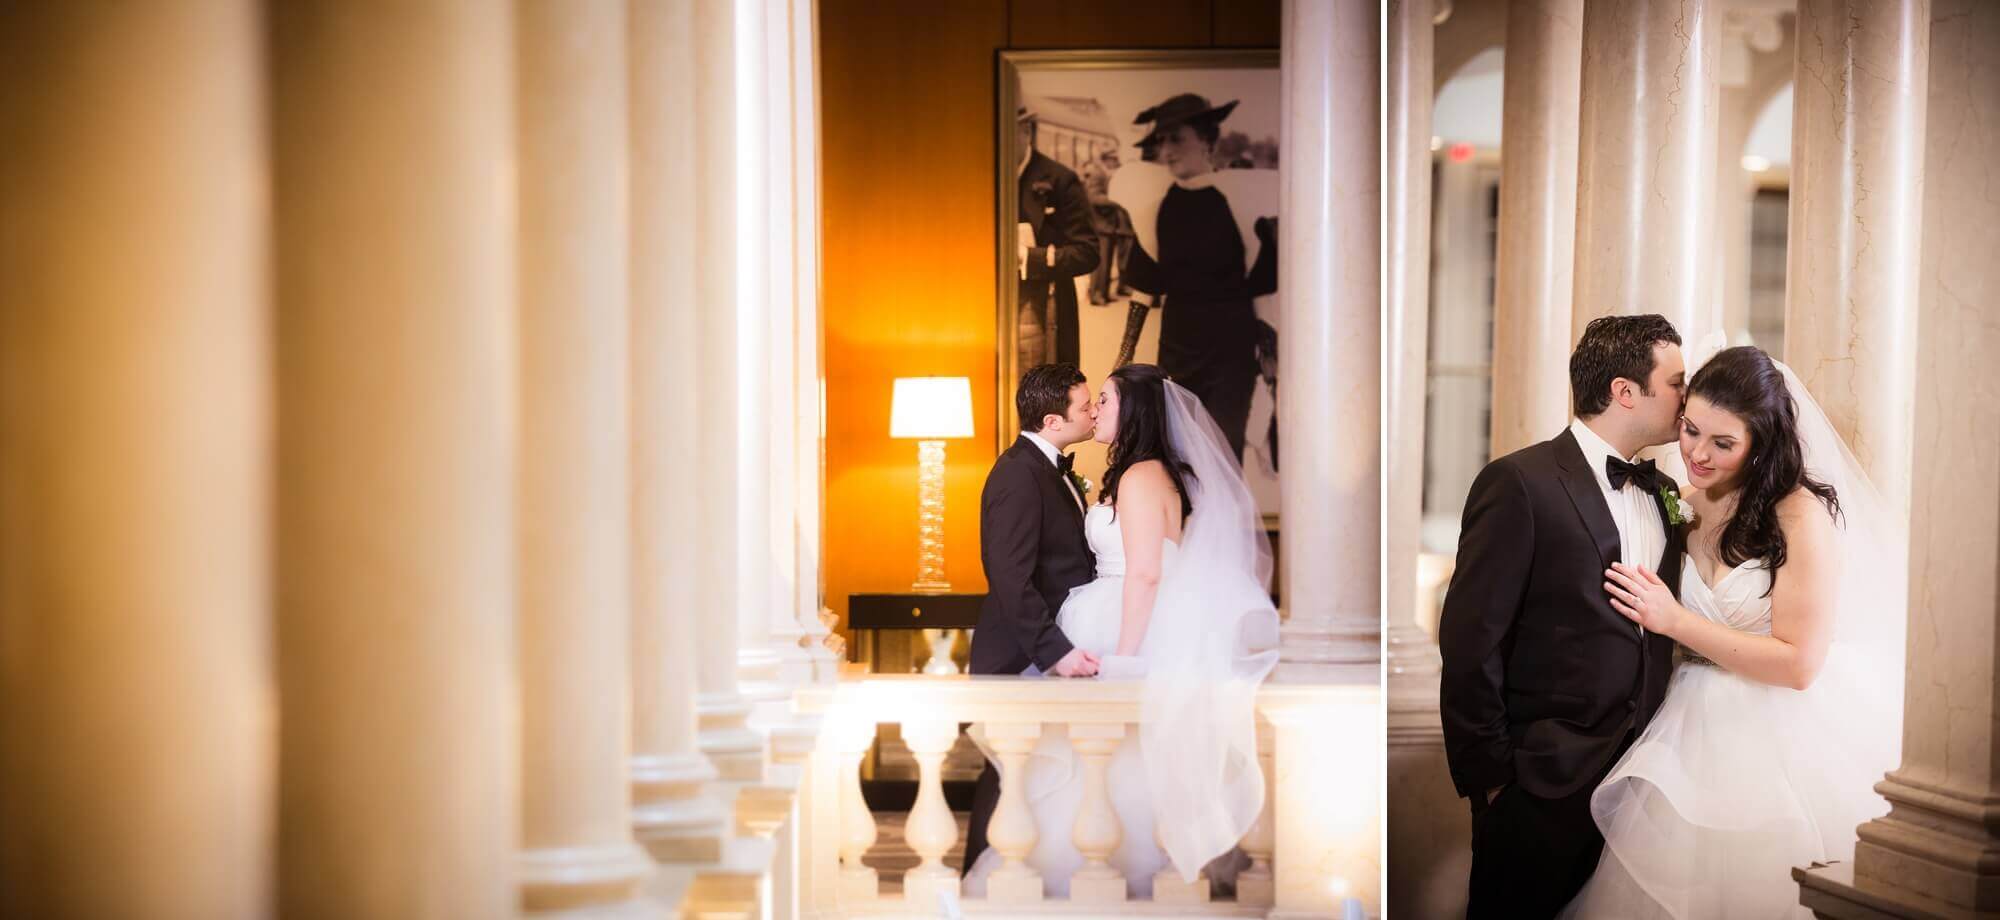 Portraits of the bride and groom through columns at the the Omni King Edward Hotel in Toronto